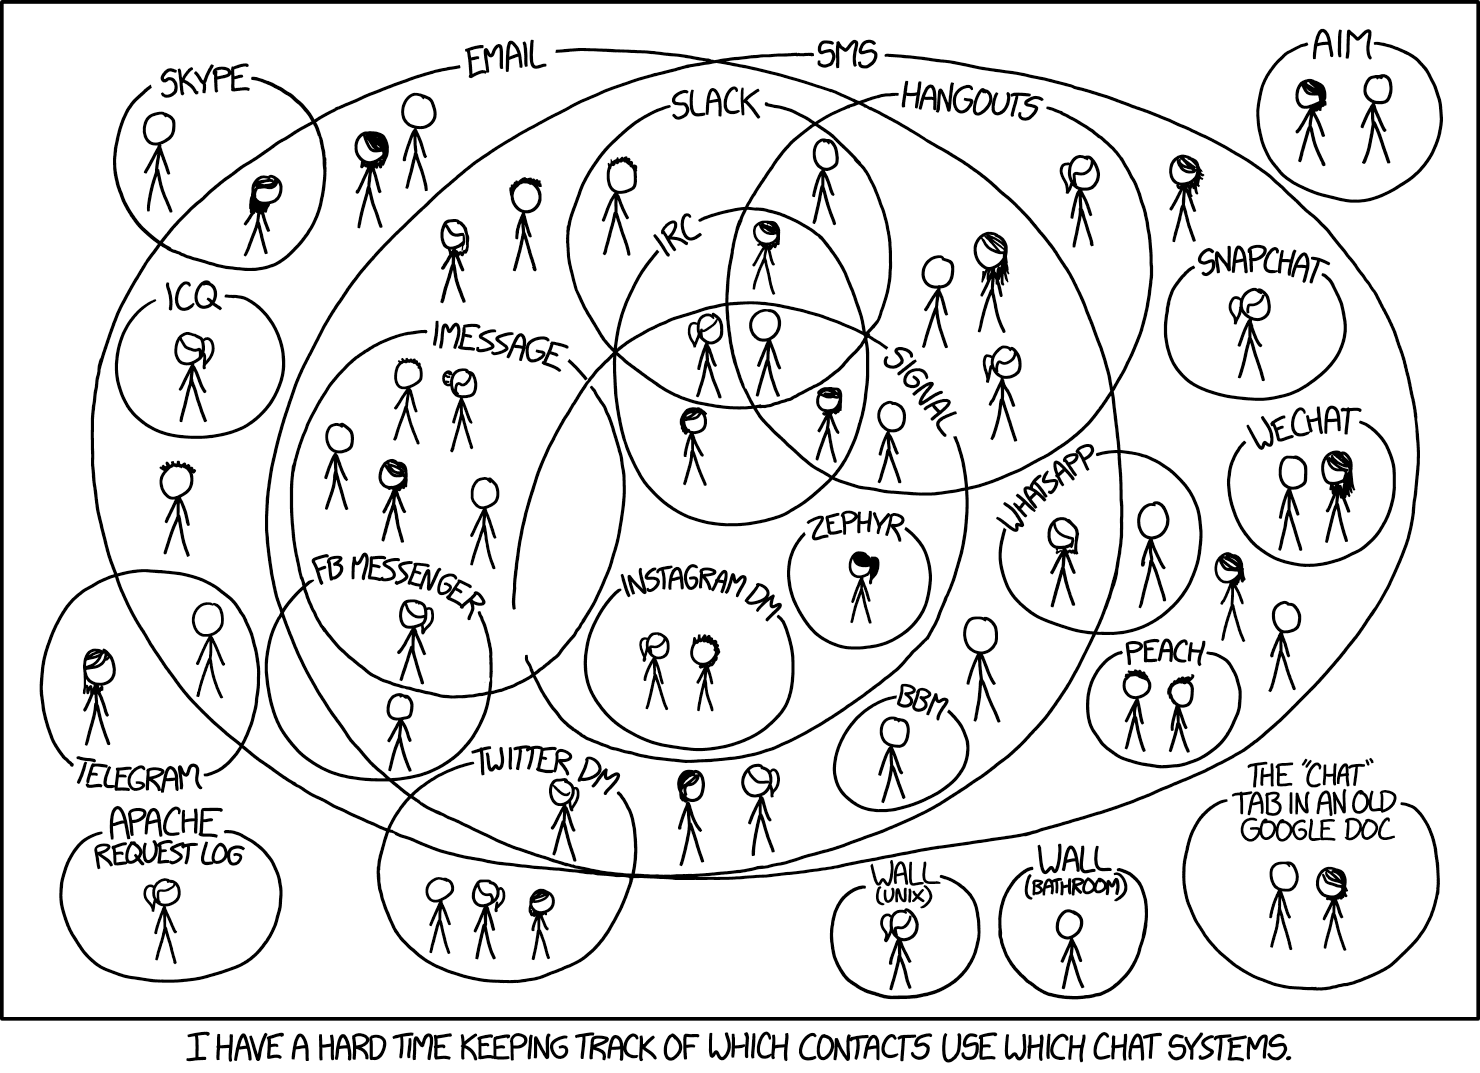 XKCD illustration 1810 on chat systems